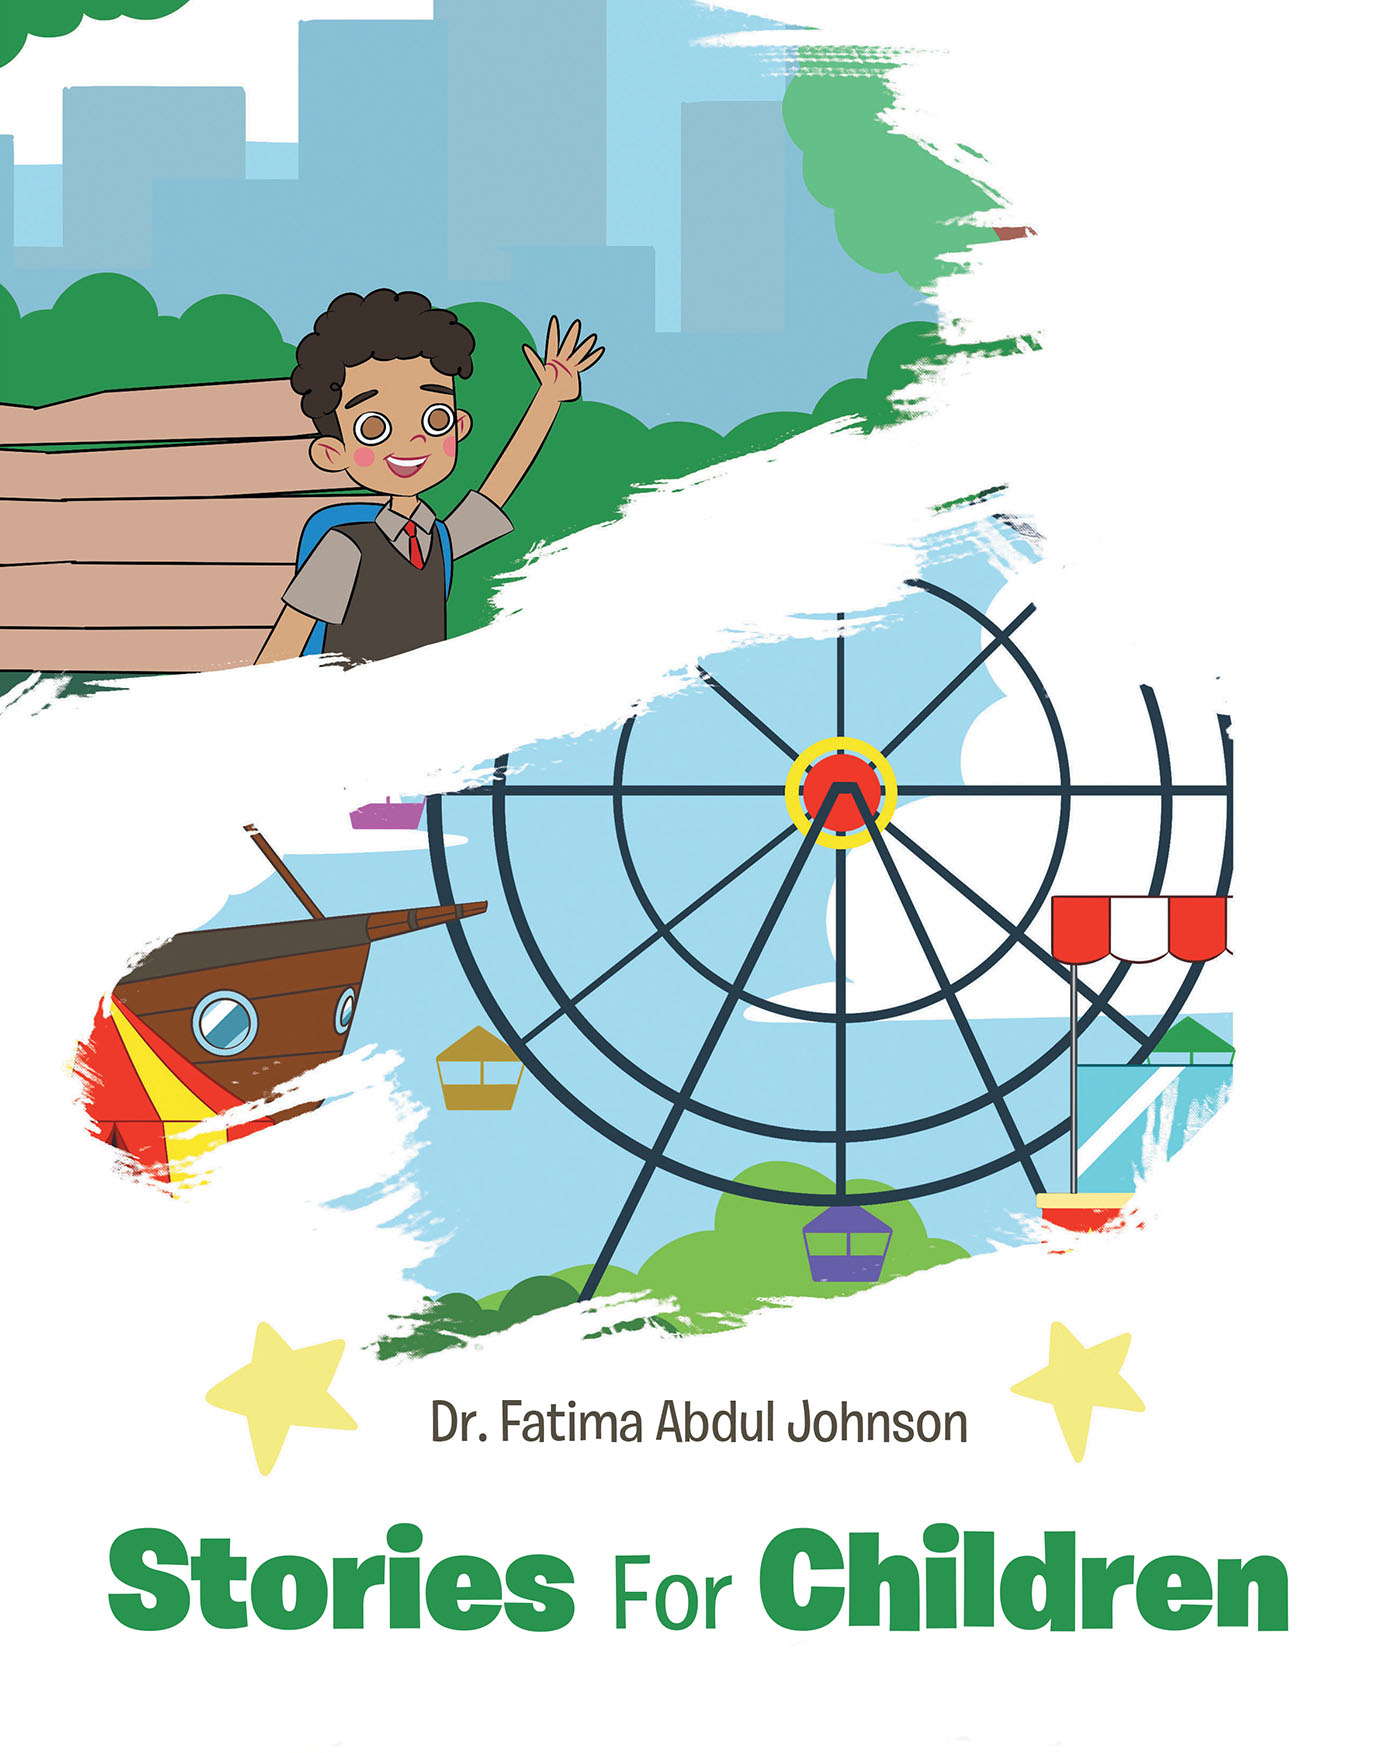 Dr. Fatima Abdul Johnson’s Newly Released "Stories for Children" is a Heartwarming Pair of Stories with Important Lessons of Life and Faith